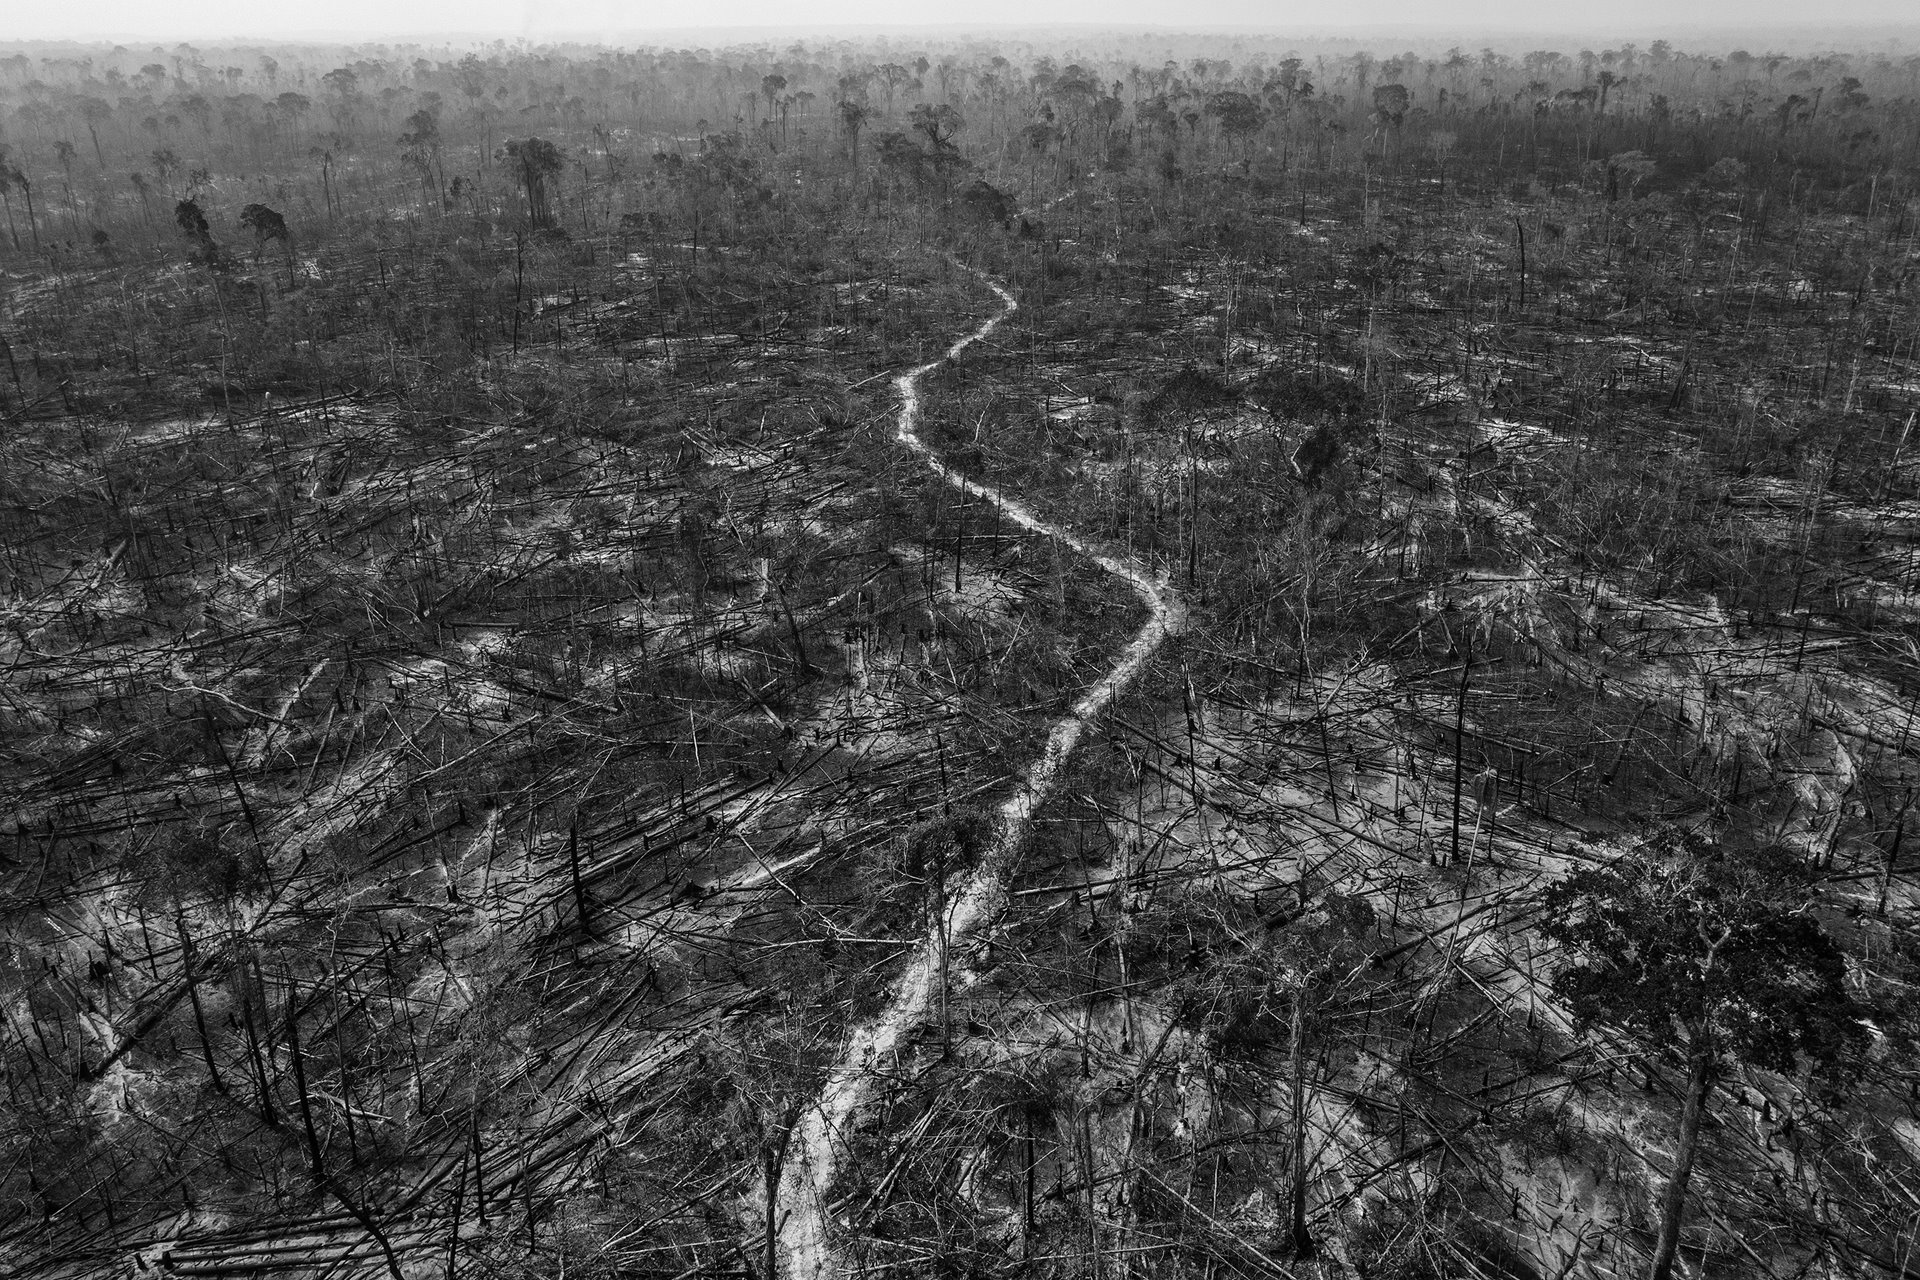 <p>Massive deforestation is evident in Apuí, a municipality along the Trans-Amazonian Highway, southern Amazon, Brazil. Apuí is on the front line of agricultural expansion in the Amazon, and is one of the region&rsquo;s most deforested municipalities.</p>
